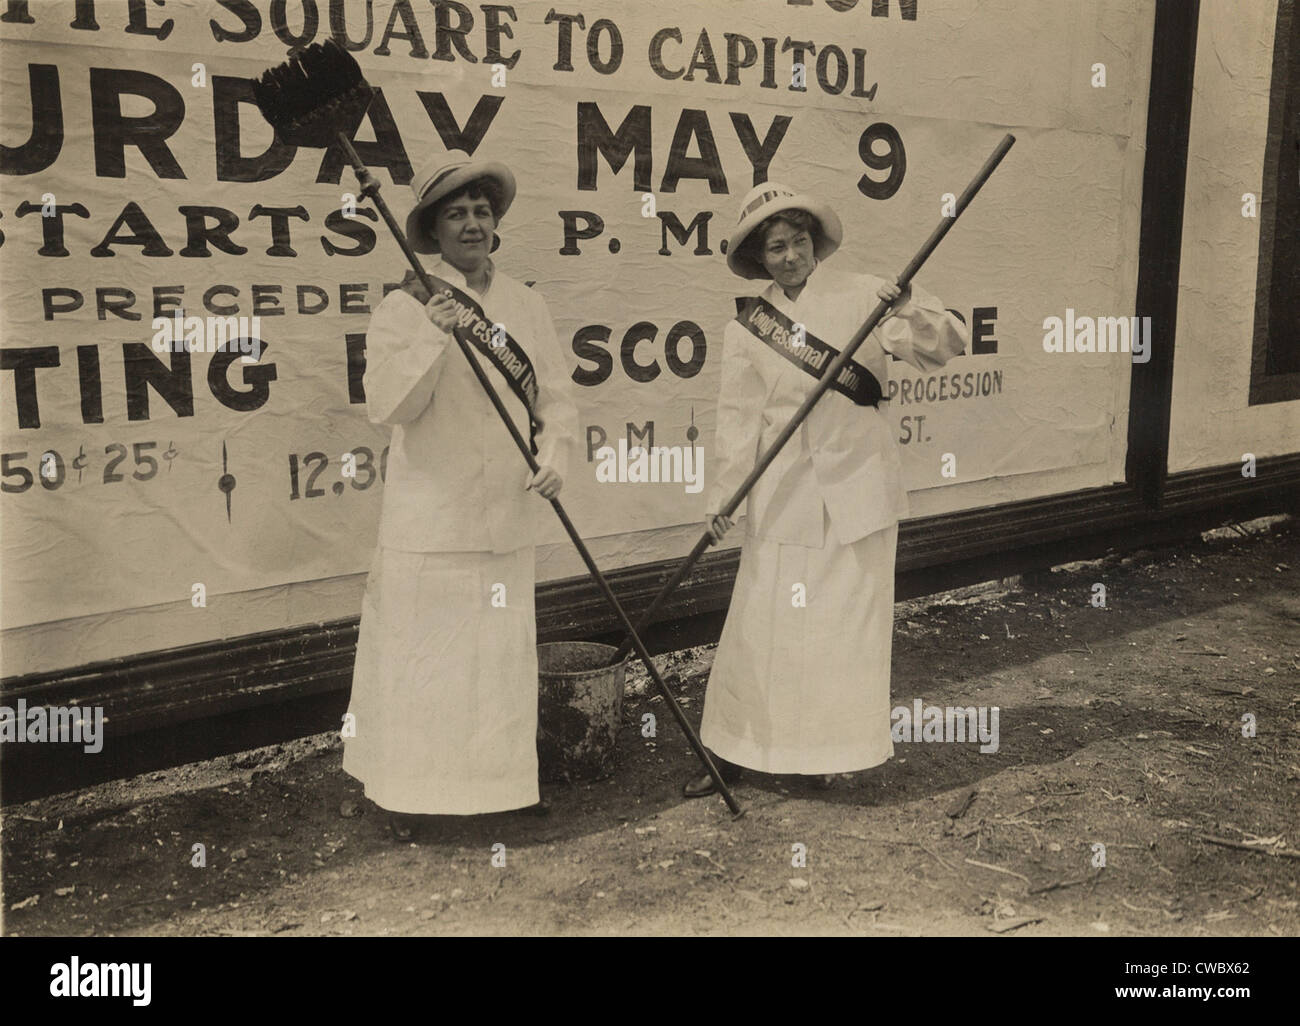 Two members of the Congressional Union for Woman Suffrage holding brushes in front of a large billboard advertisement for the Stock Photo